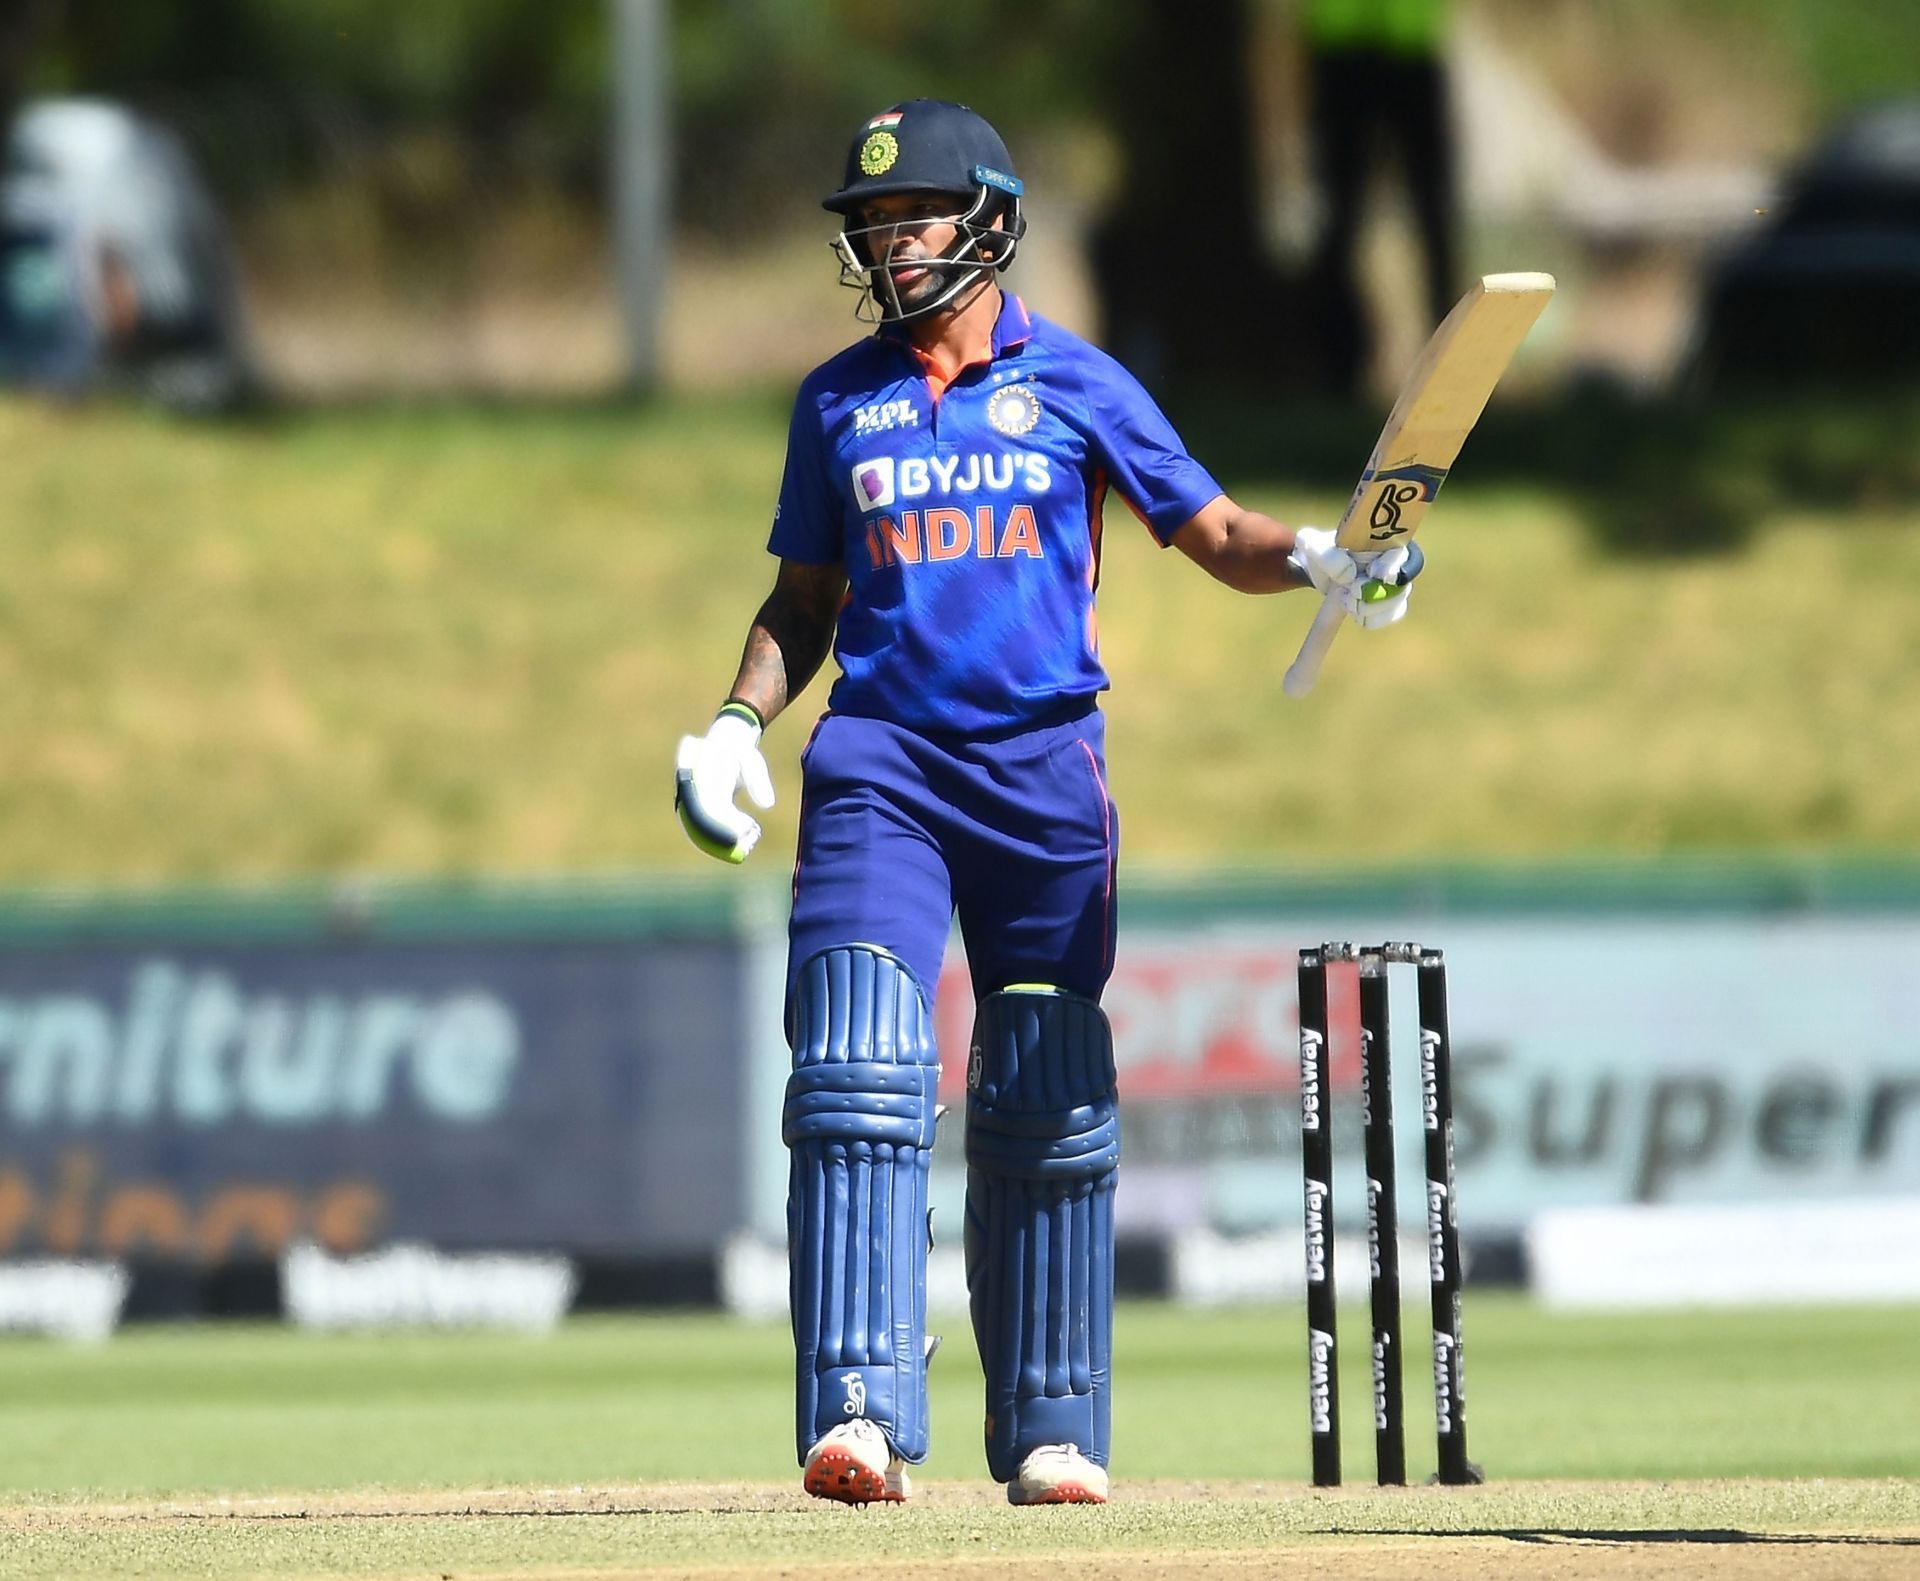 Shikhar Dhawan during the ODI series in South Africa earlier this year. Pic: Getty Images